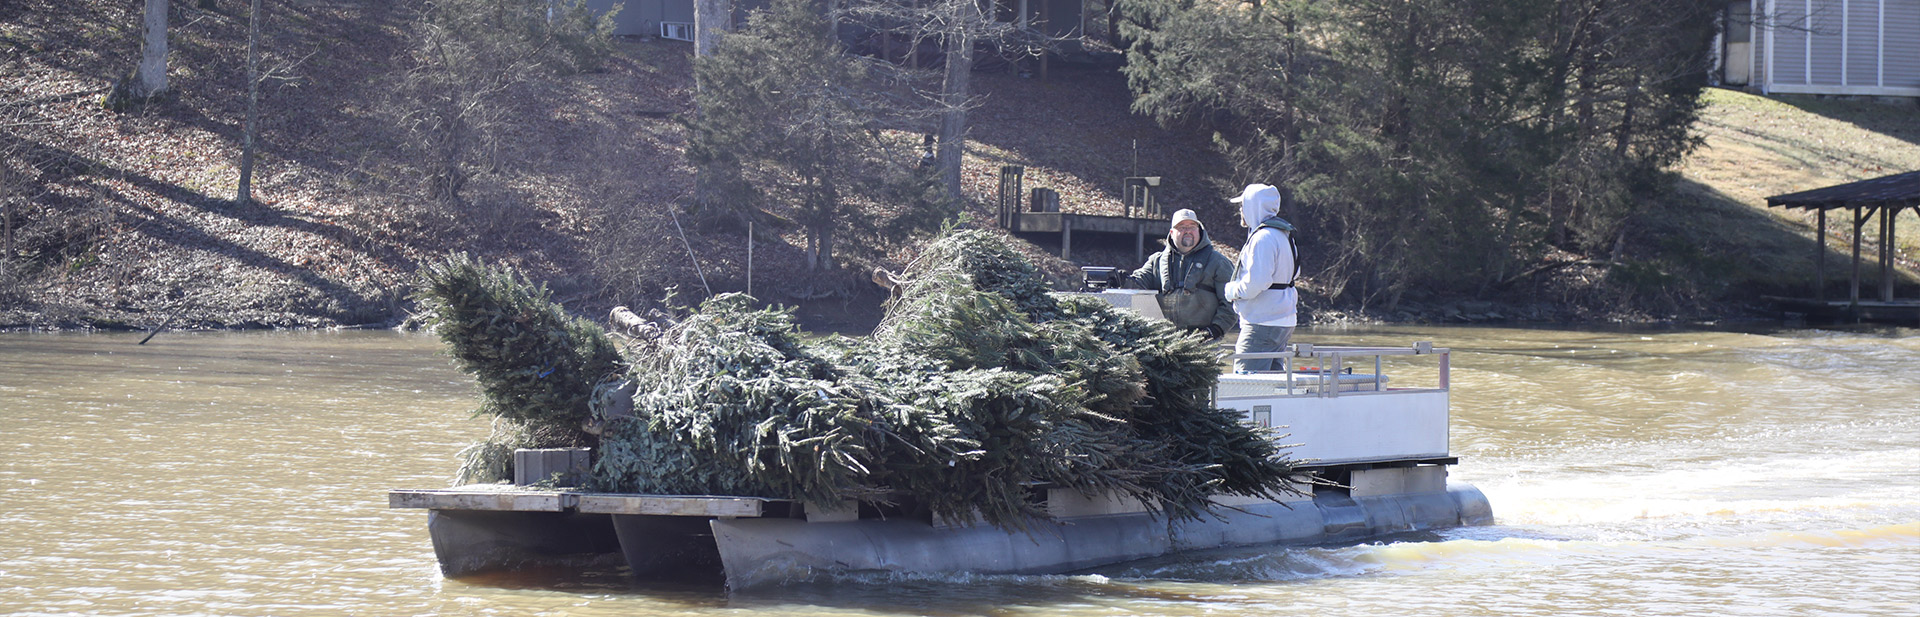 Photograph showing two men on a barge filled with Chirstmas trees